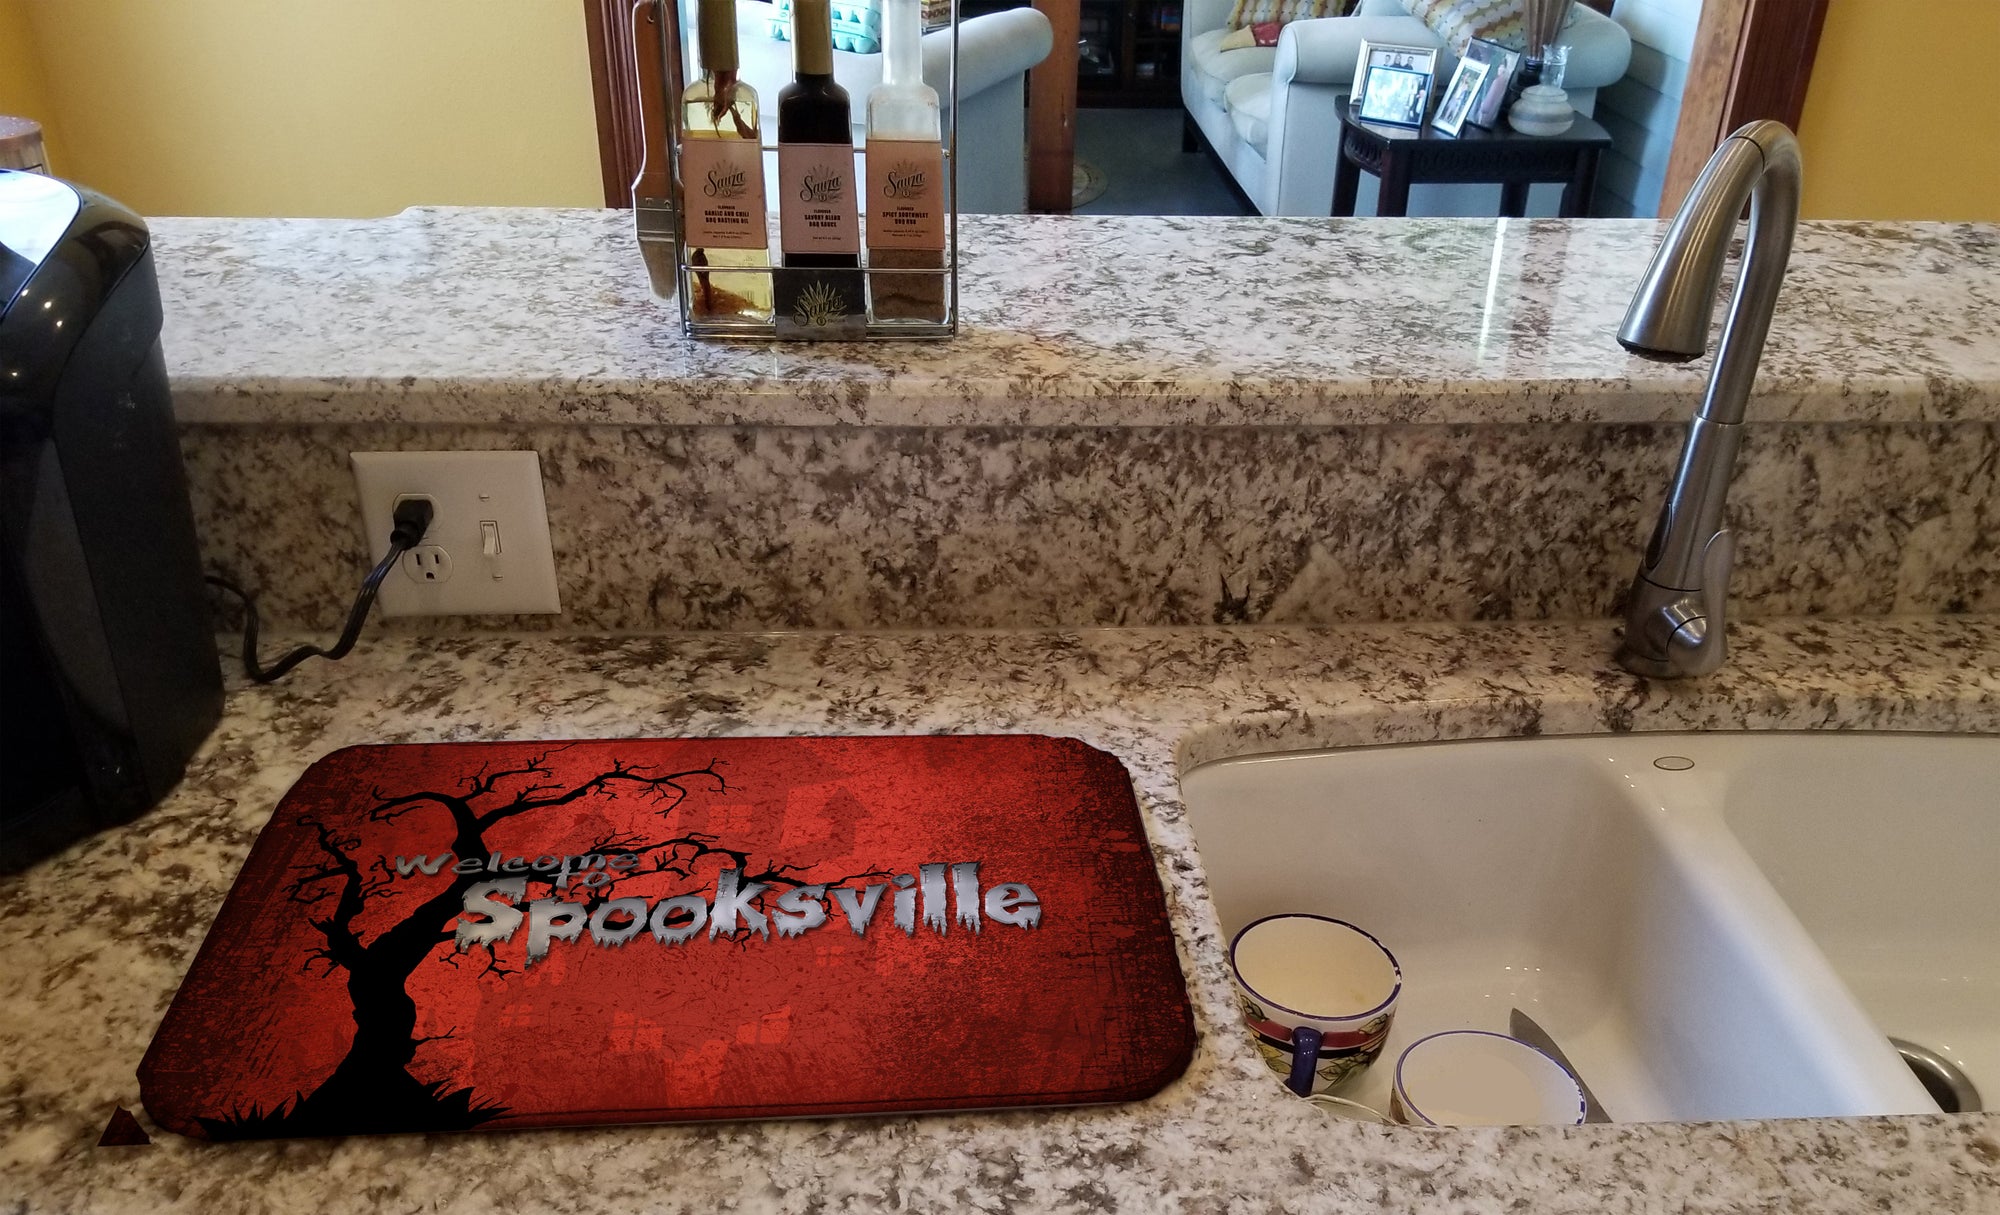 Welcome to Spooksville Halloween Dish Drying Mat SB3008DDM  the-store.com.